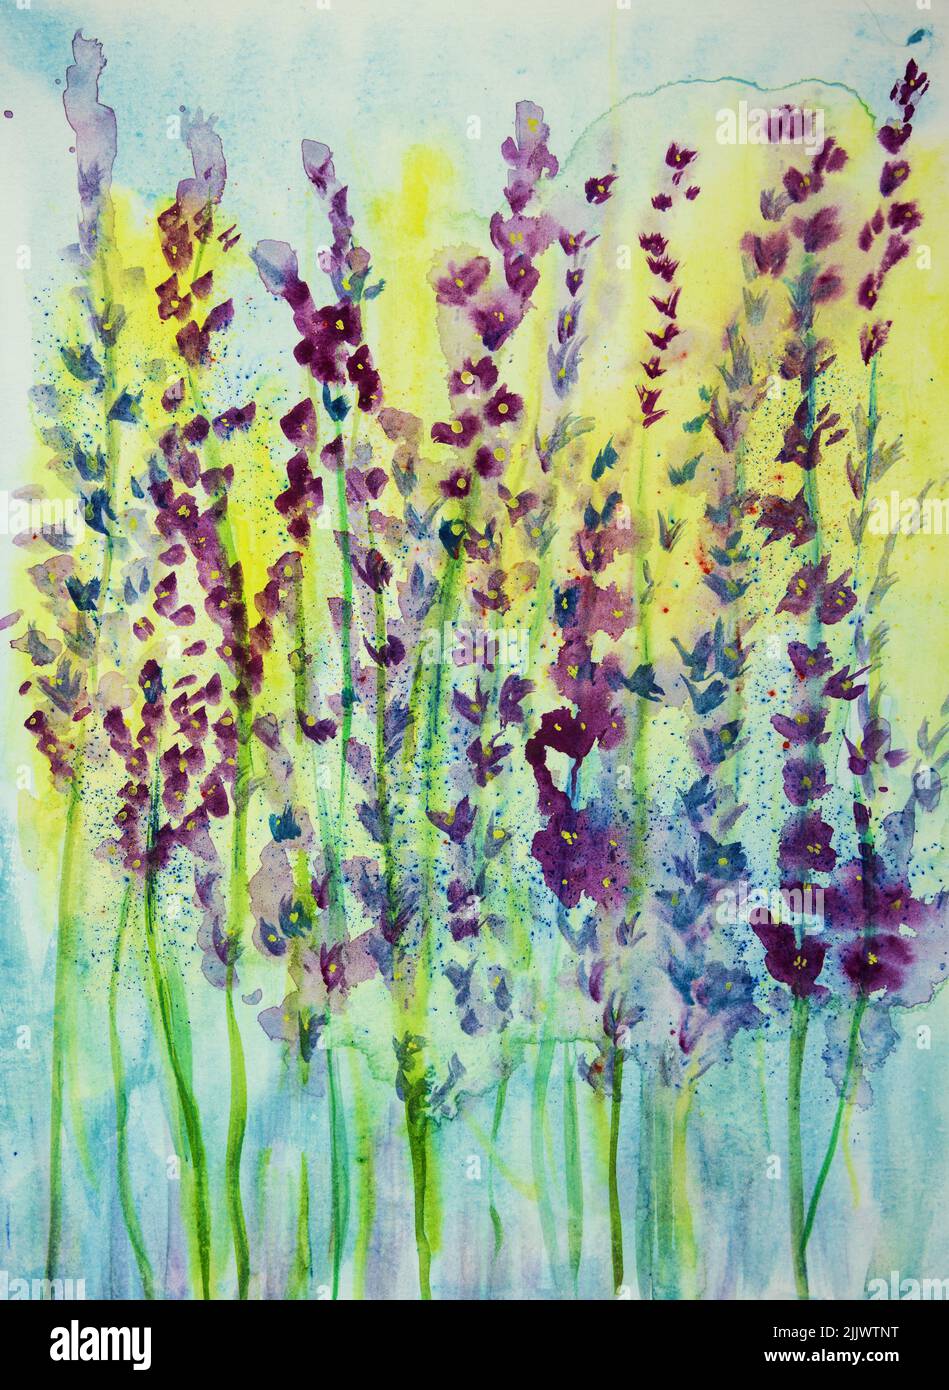 Lavender summer impression. The dabbing technique near the edges gives a soft focus effect due to the altered surface roughness of the paper. Stock Photo